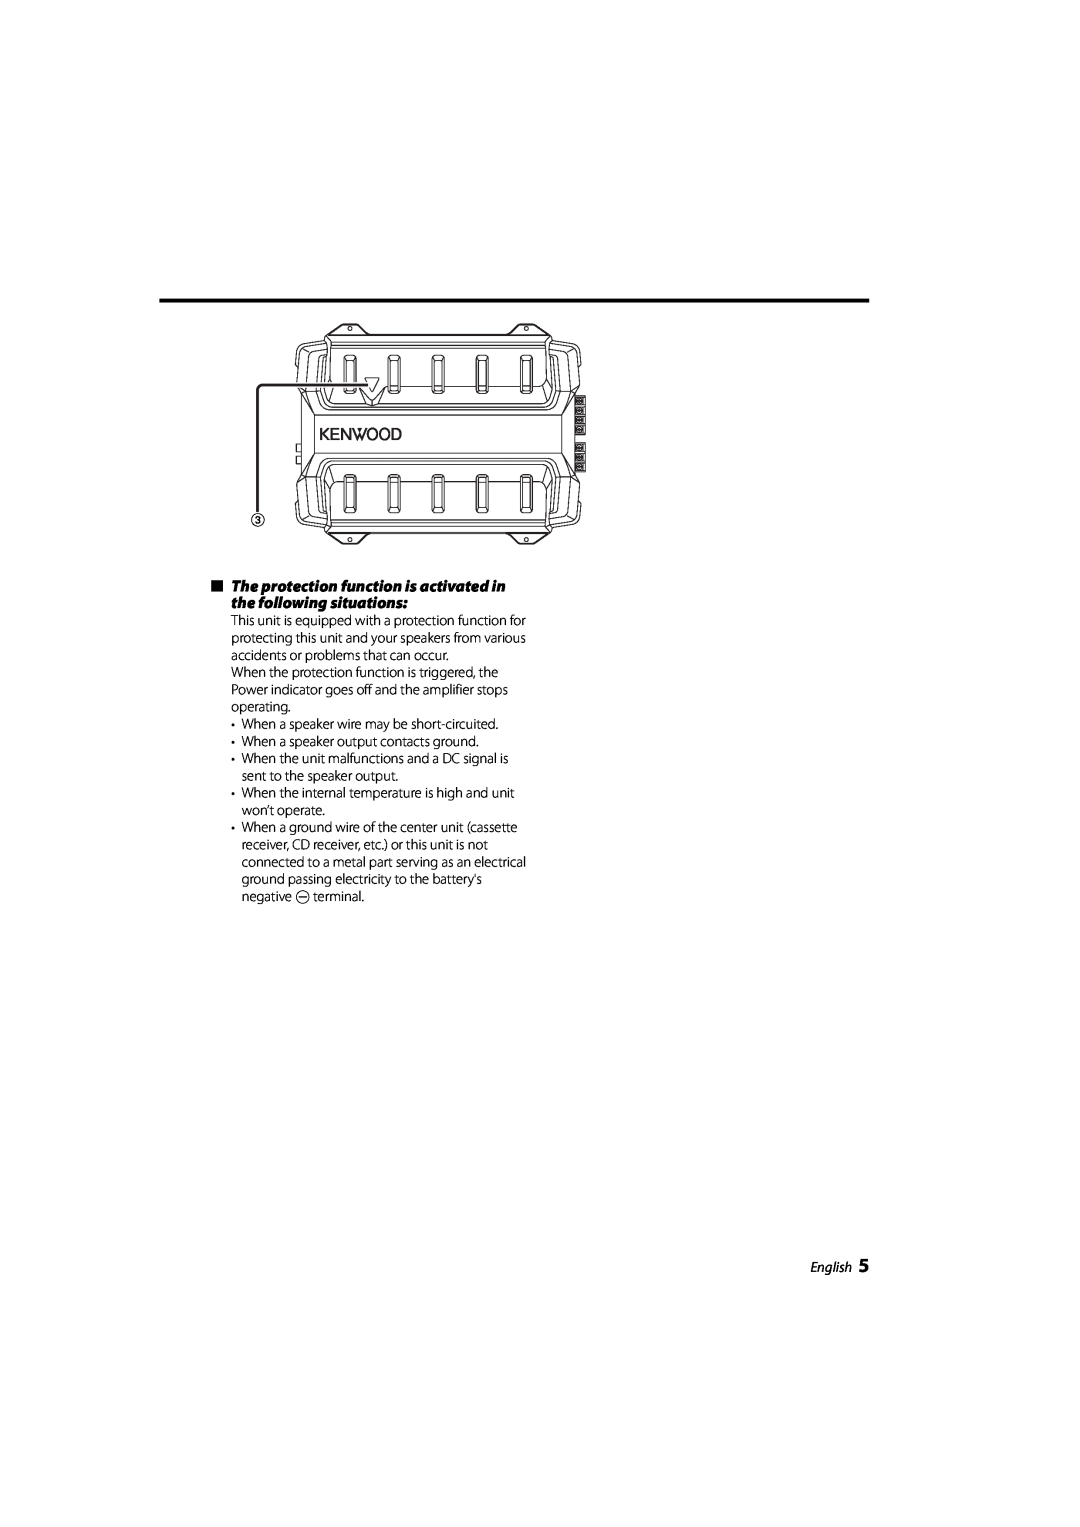 Kenwood KAC-6203 instruction manual When a speaker wire may be short-circuited, English 